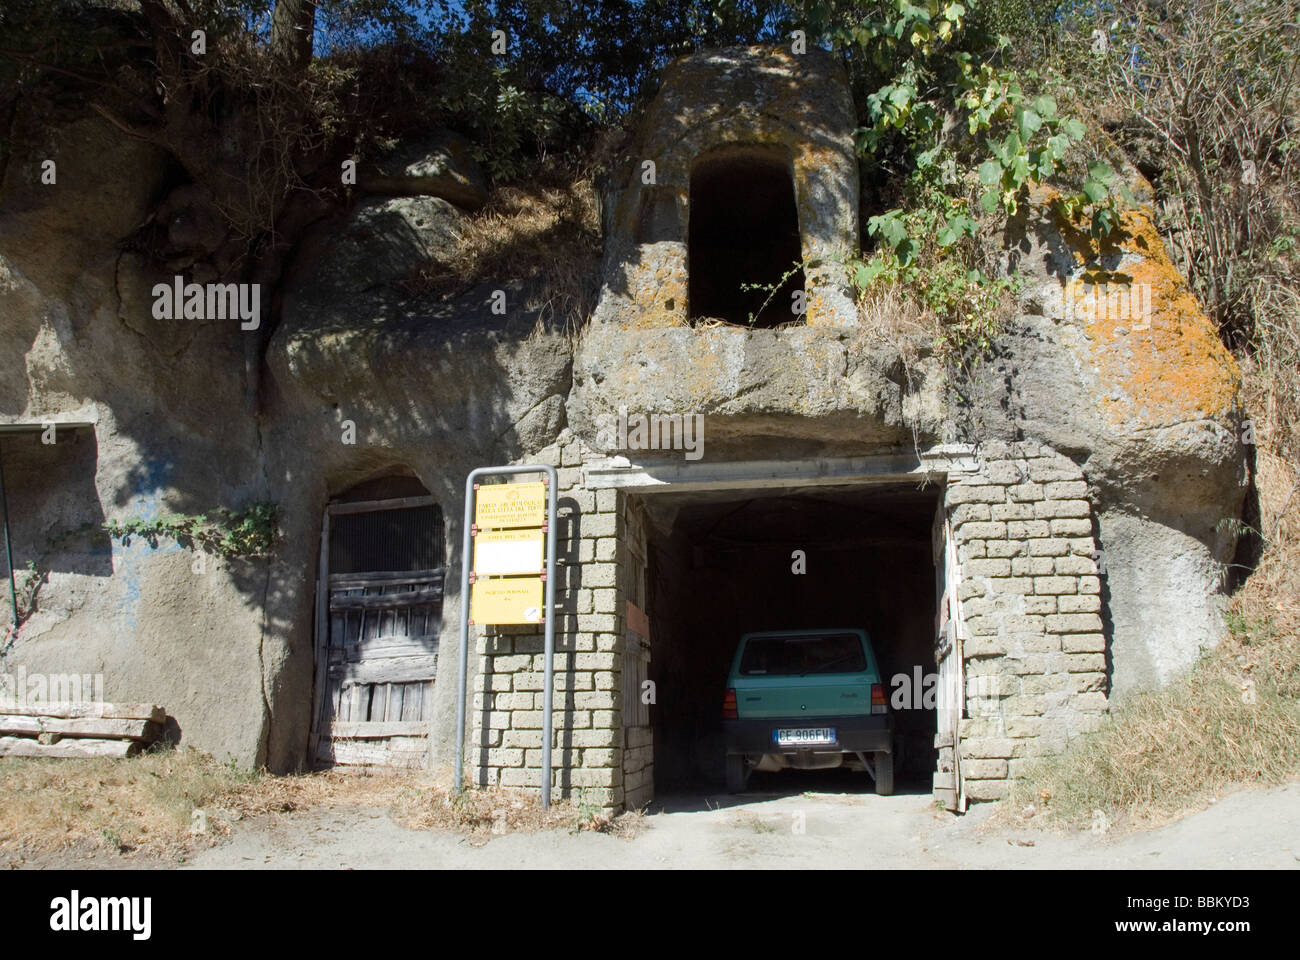 Garages and dwellings carved into tufa rock near the ruins of the Medieval castle of Vitozza in San Quirico, GR Stock Photo